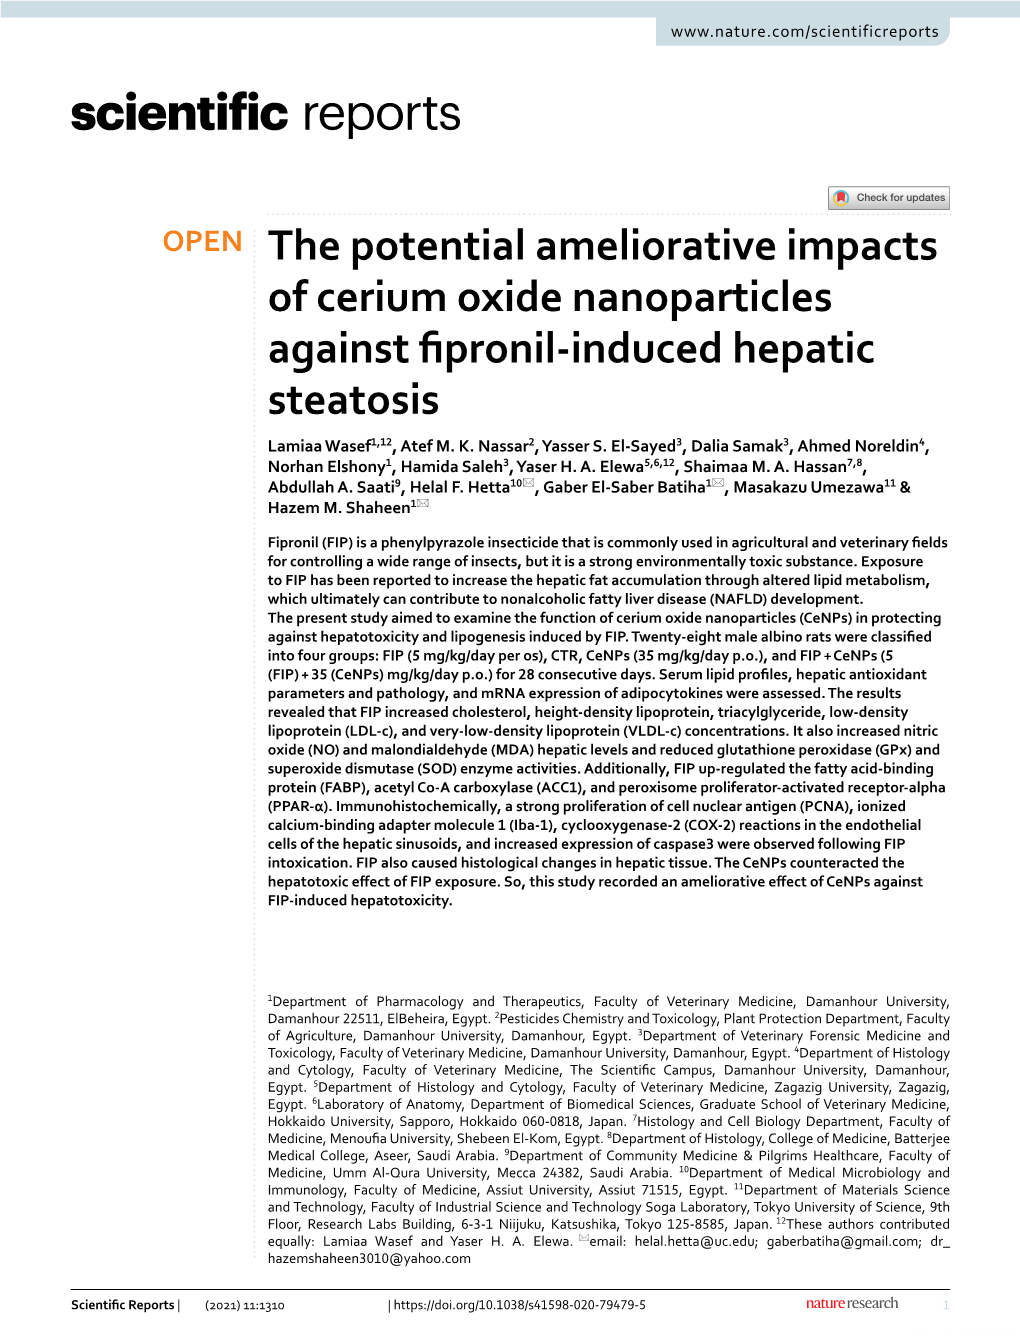 The Potential Ameliorative Impacts of Cerium Oxide Nanoparticles Against Fpronil‑Induced Hepatic Steatosis Lamiaa Wasef1,12, Atef M